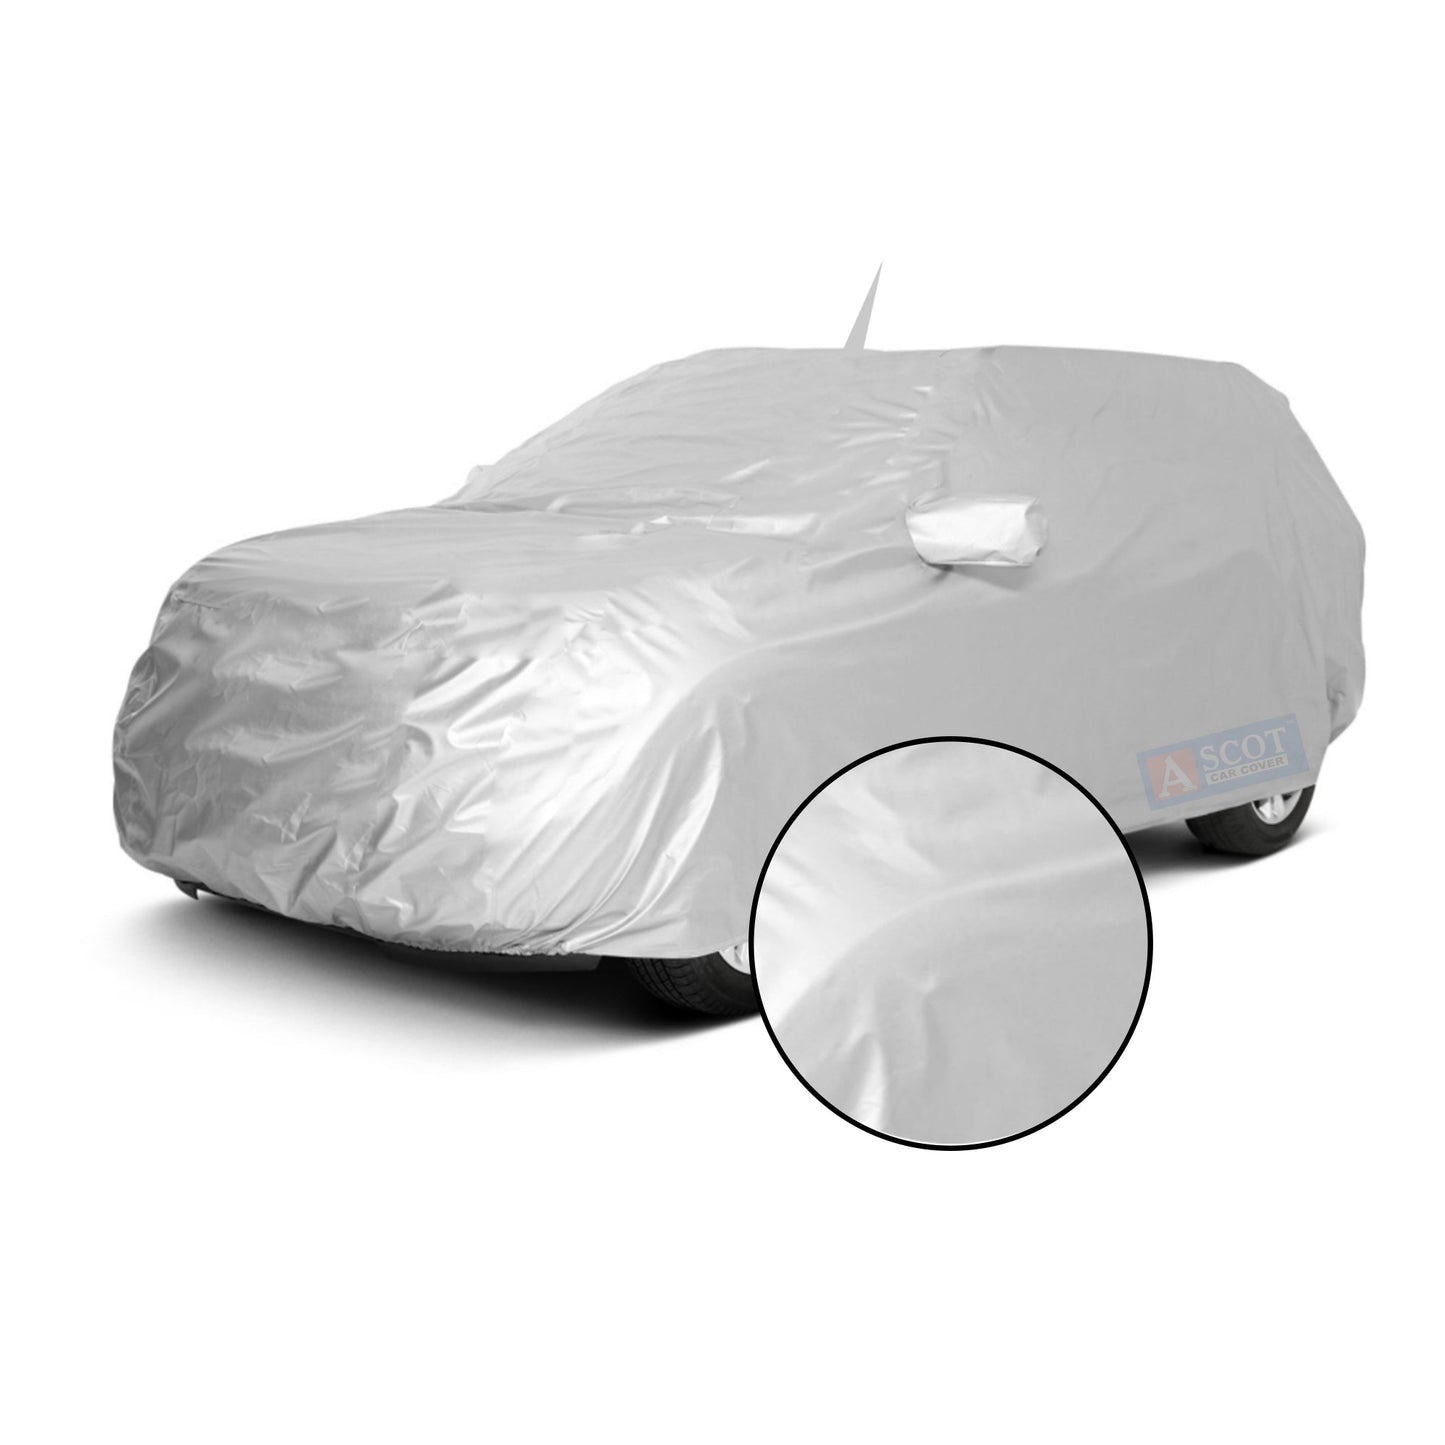 Ascot Kia Sonet Car Body Cover Dust Proof, Trippel Stitched